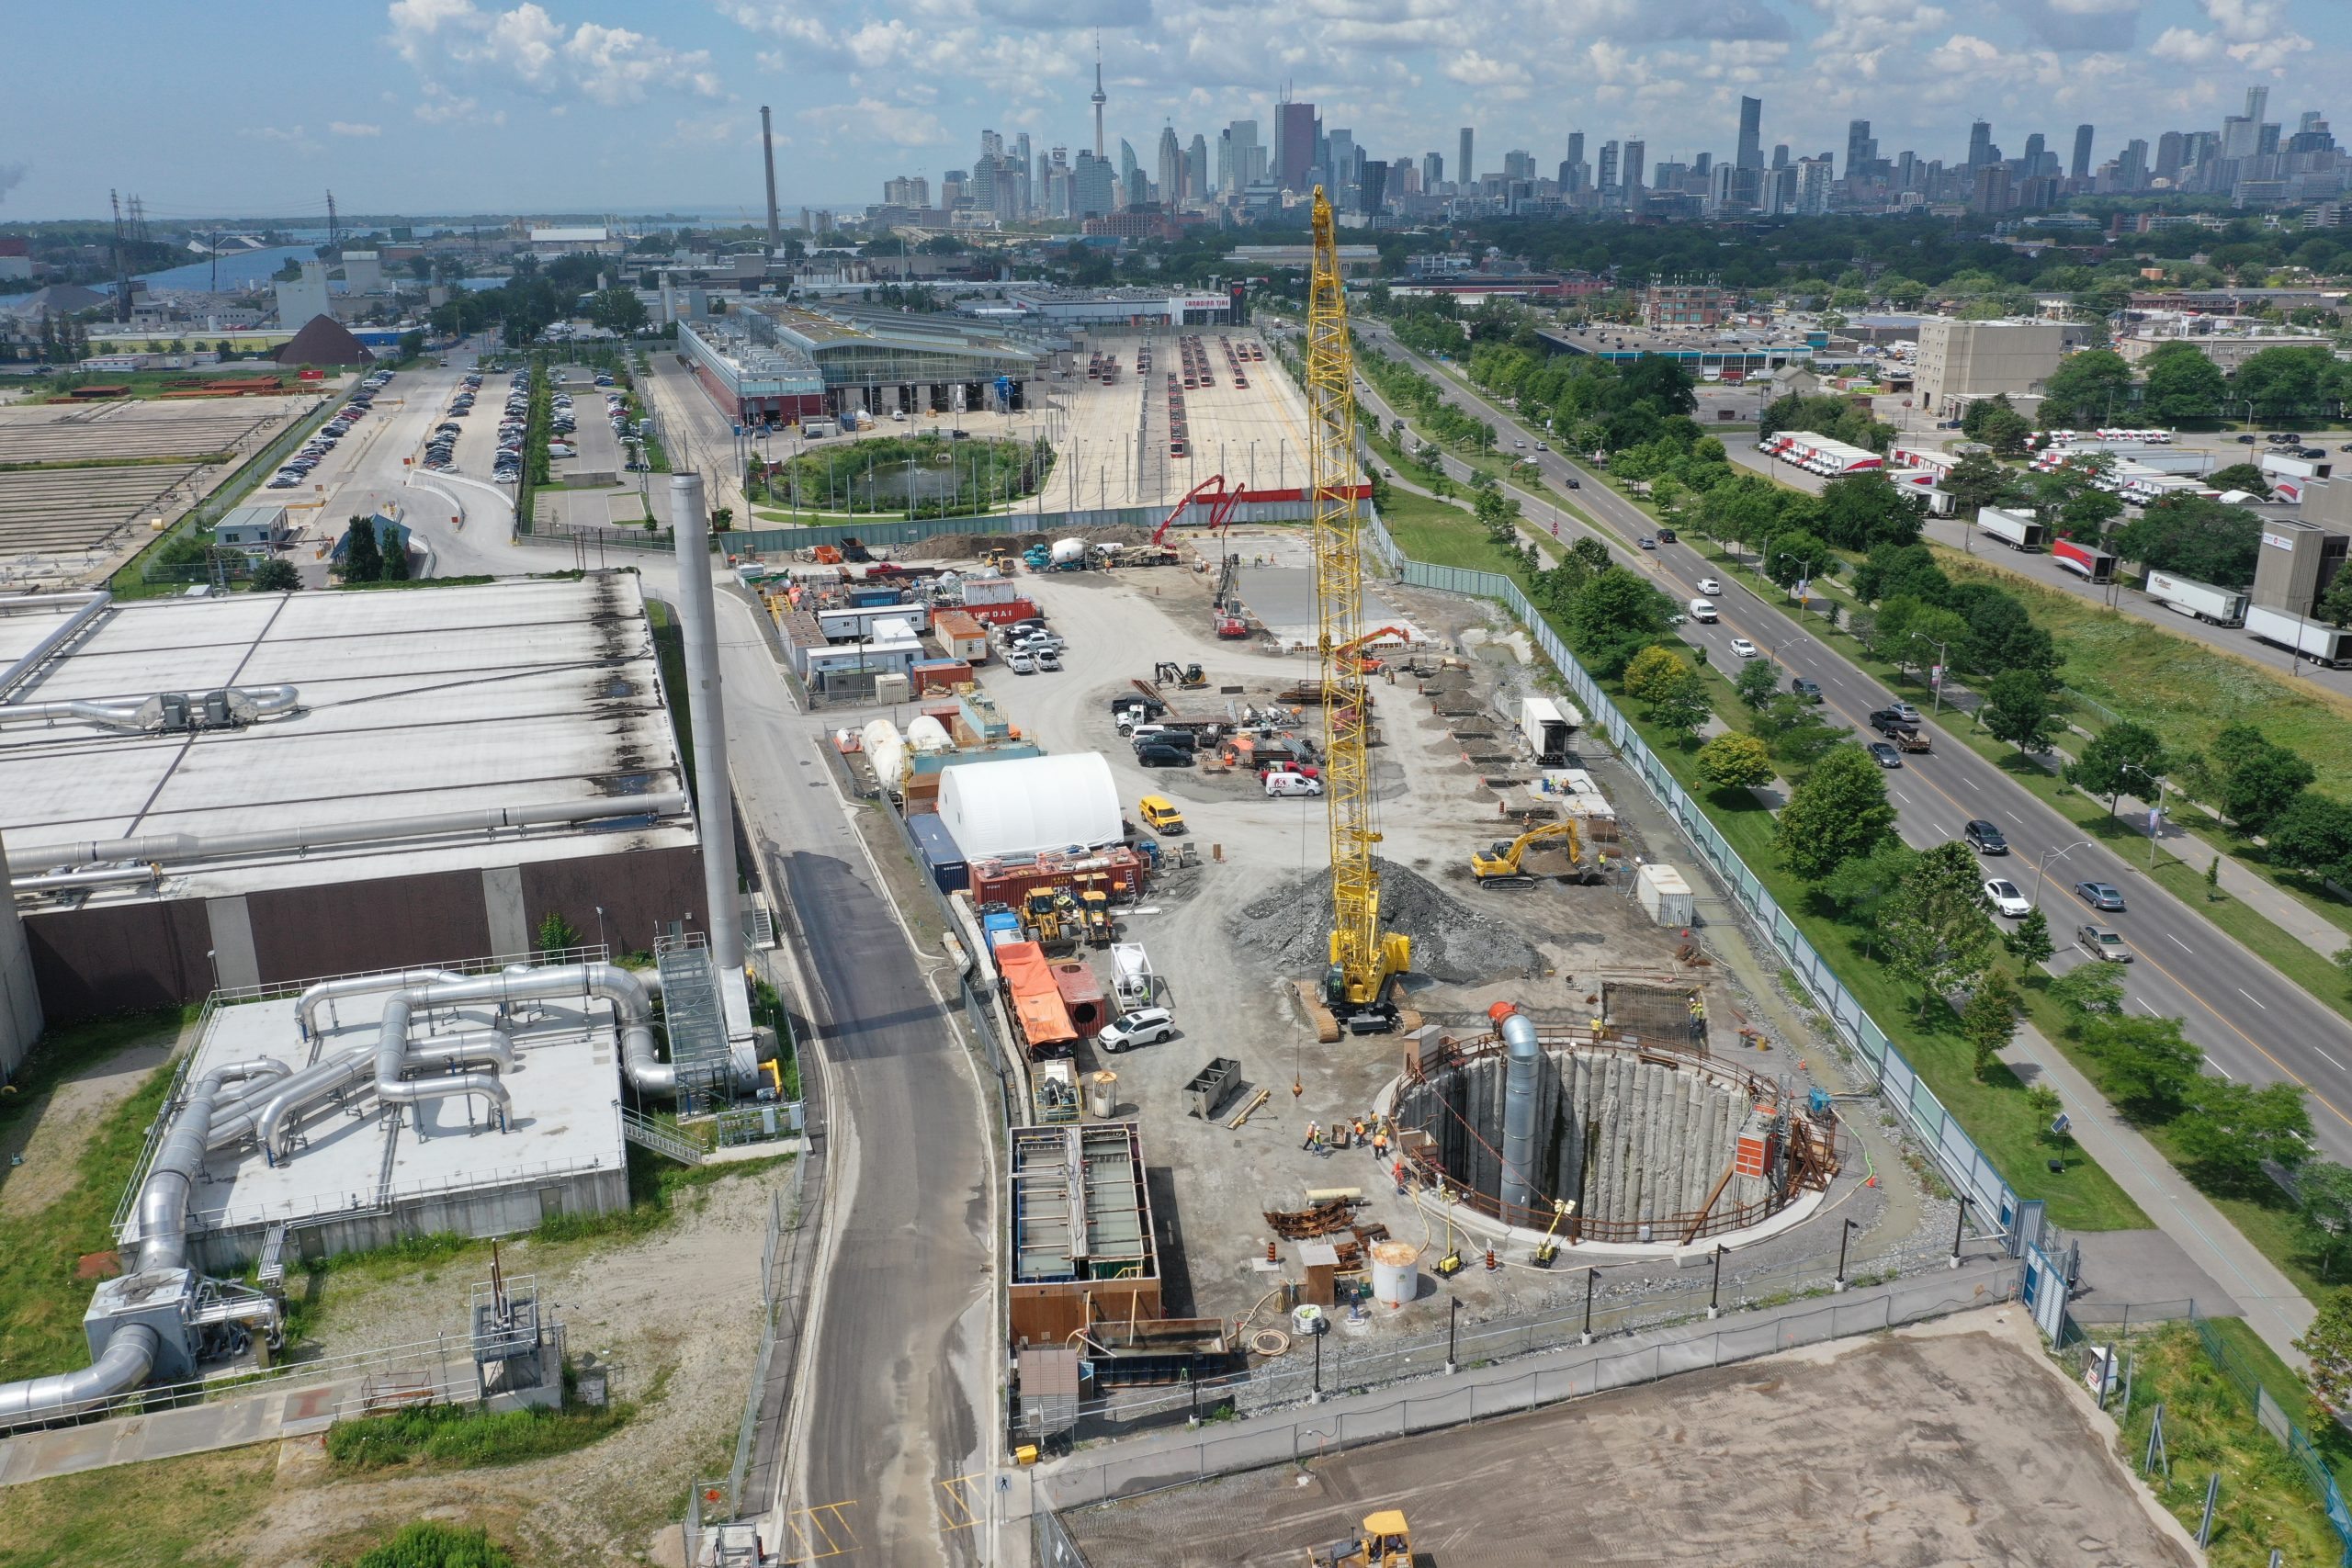 Coxwell Bypass Tunnel project construction, July 2019